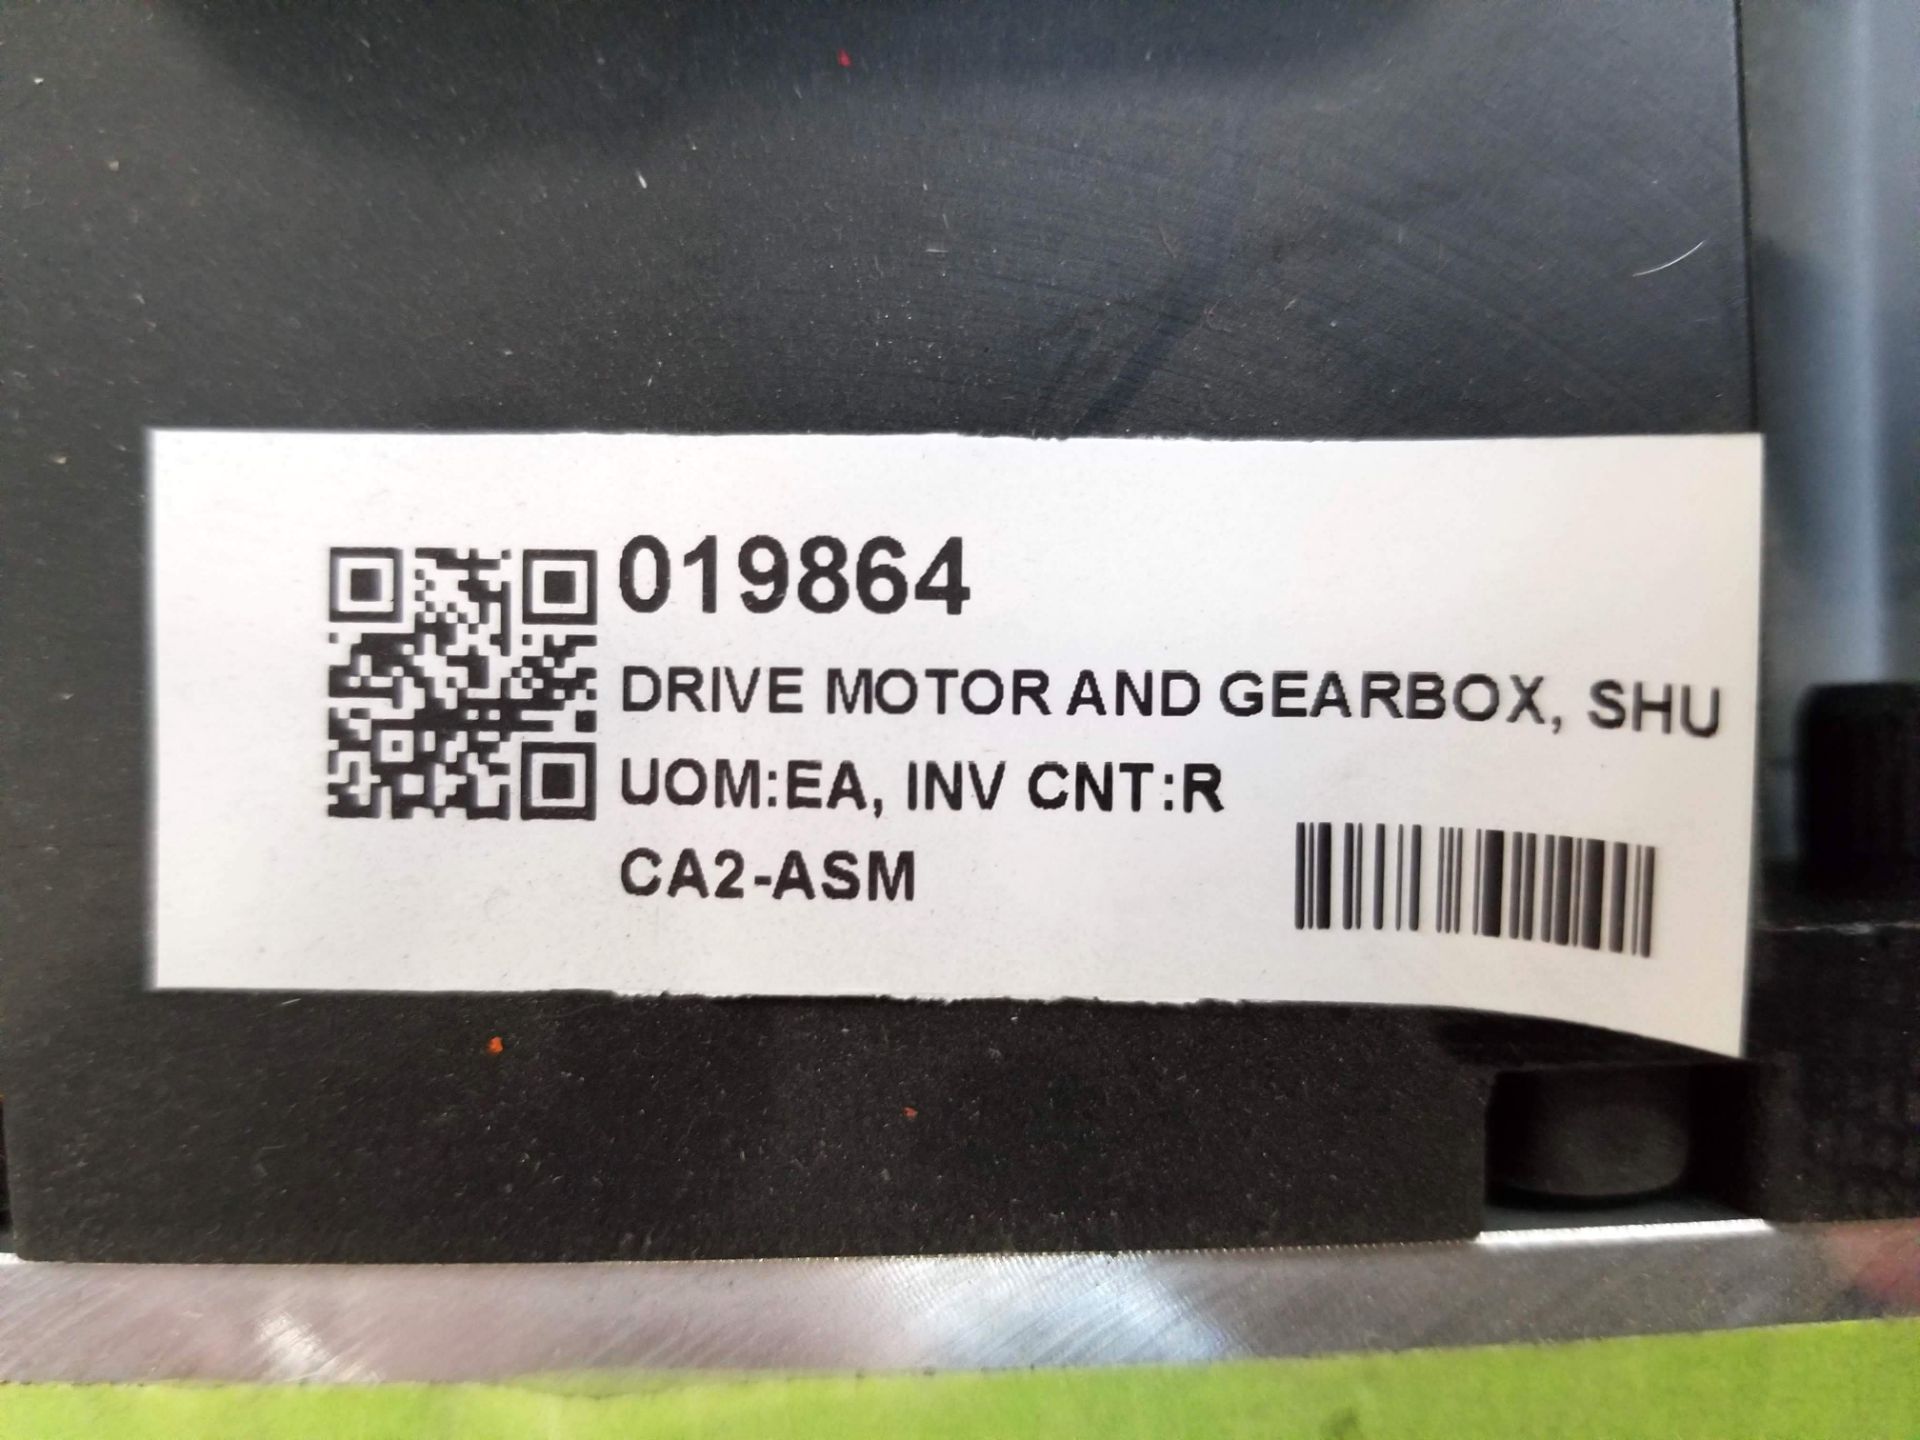 LOT - DRIVE MOTOR AND GEARBOX, SHUTTER N500. SERVOMOTOR AND GEARBOX. PLATE MOTOR MOUNT. CYLINDER, - Image 15 of 17